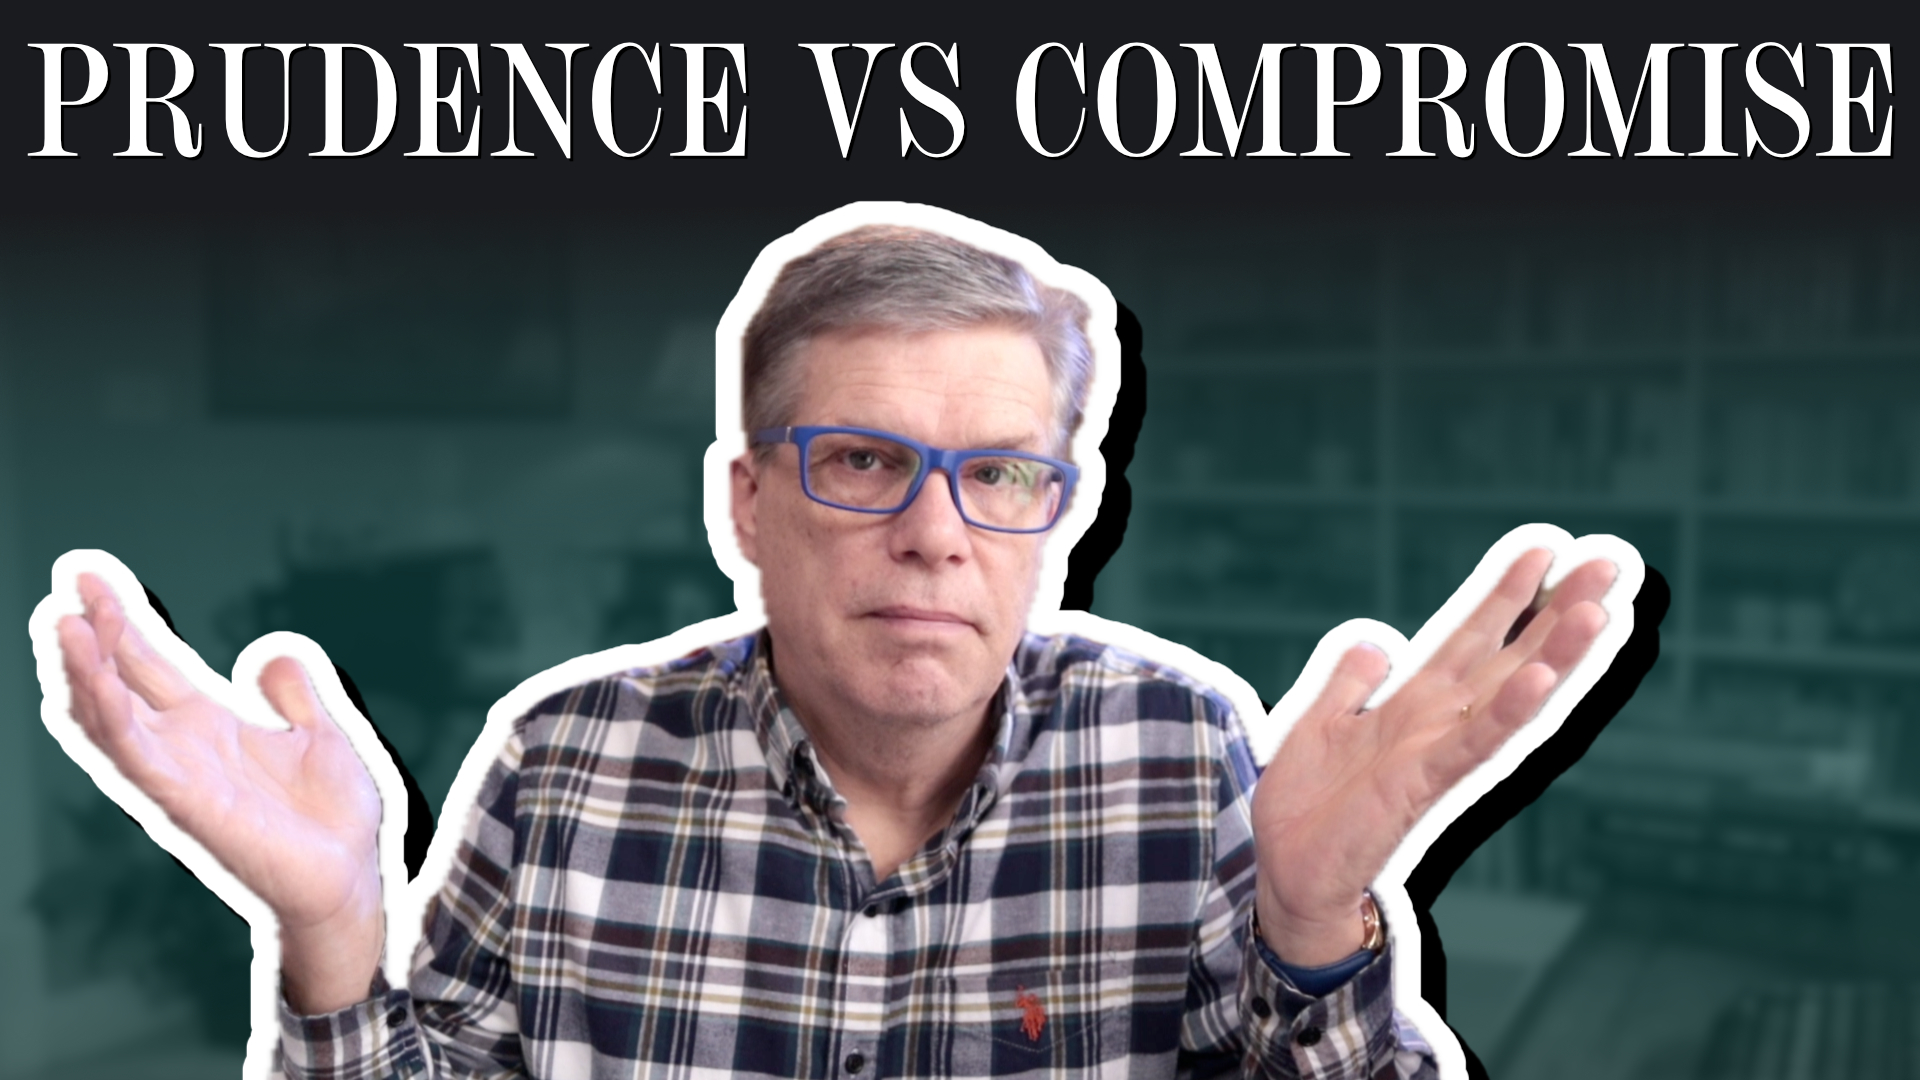 Prudence vs. Compromise